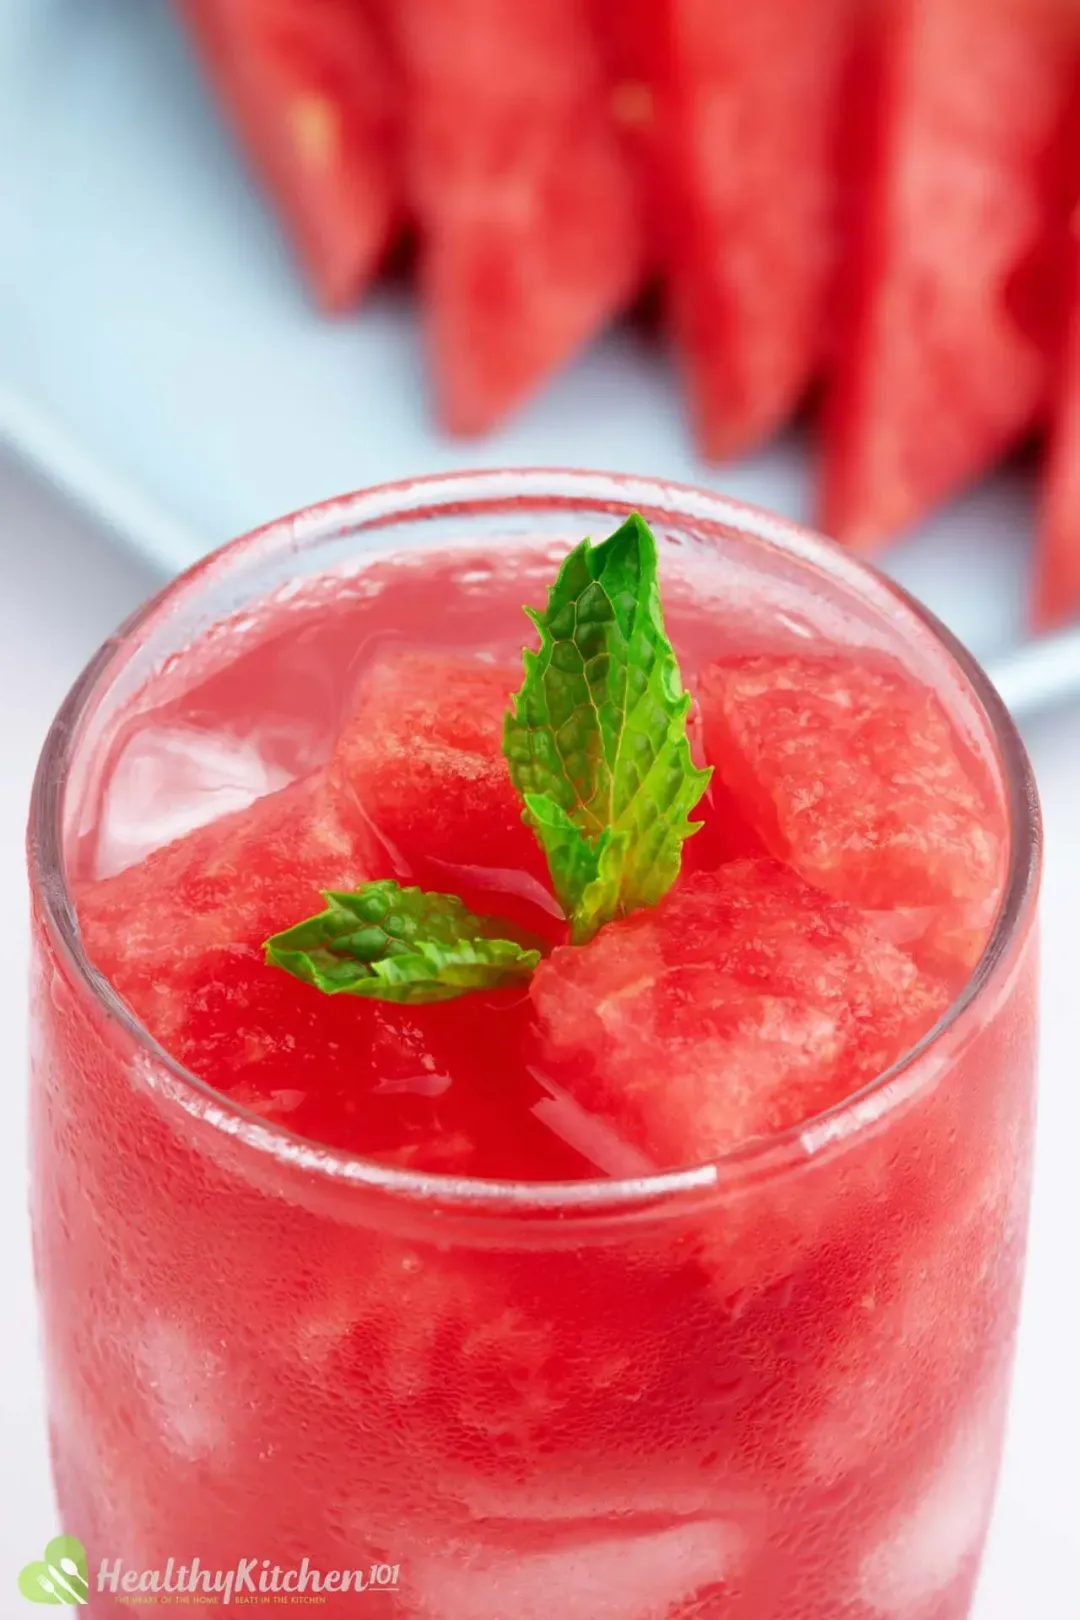 A close-up shot of a glass of watermelon juice and lemon from above with mint leaves on top for decoration